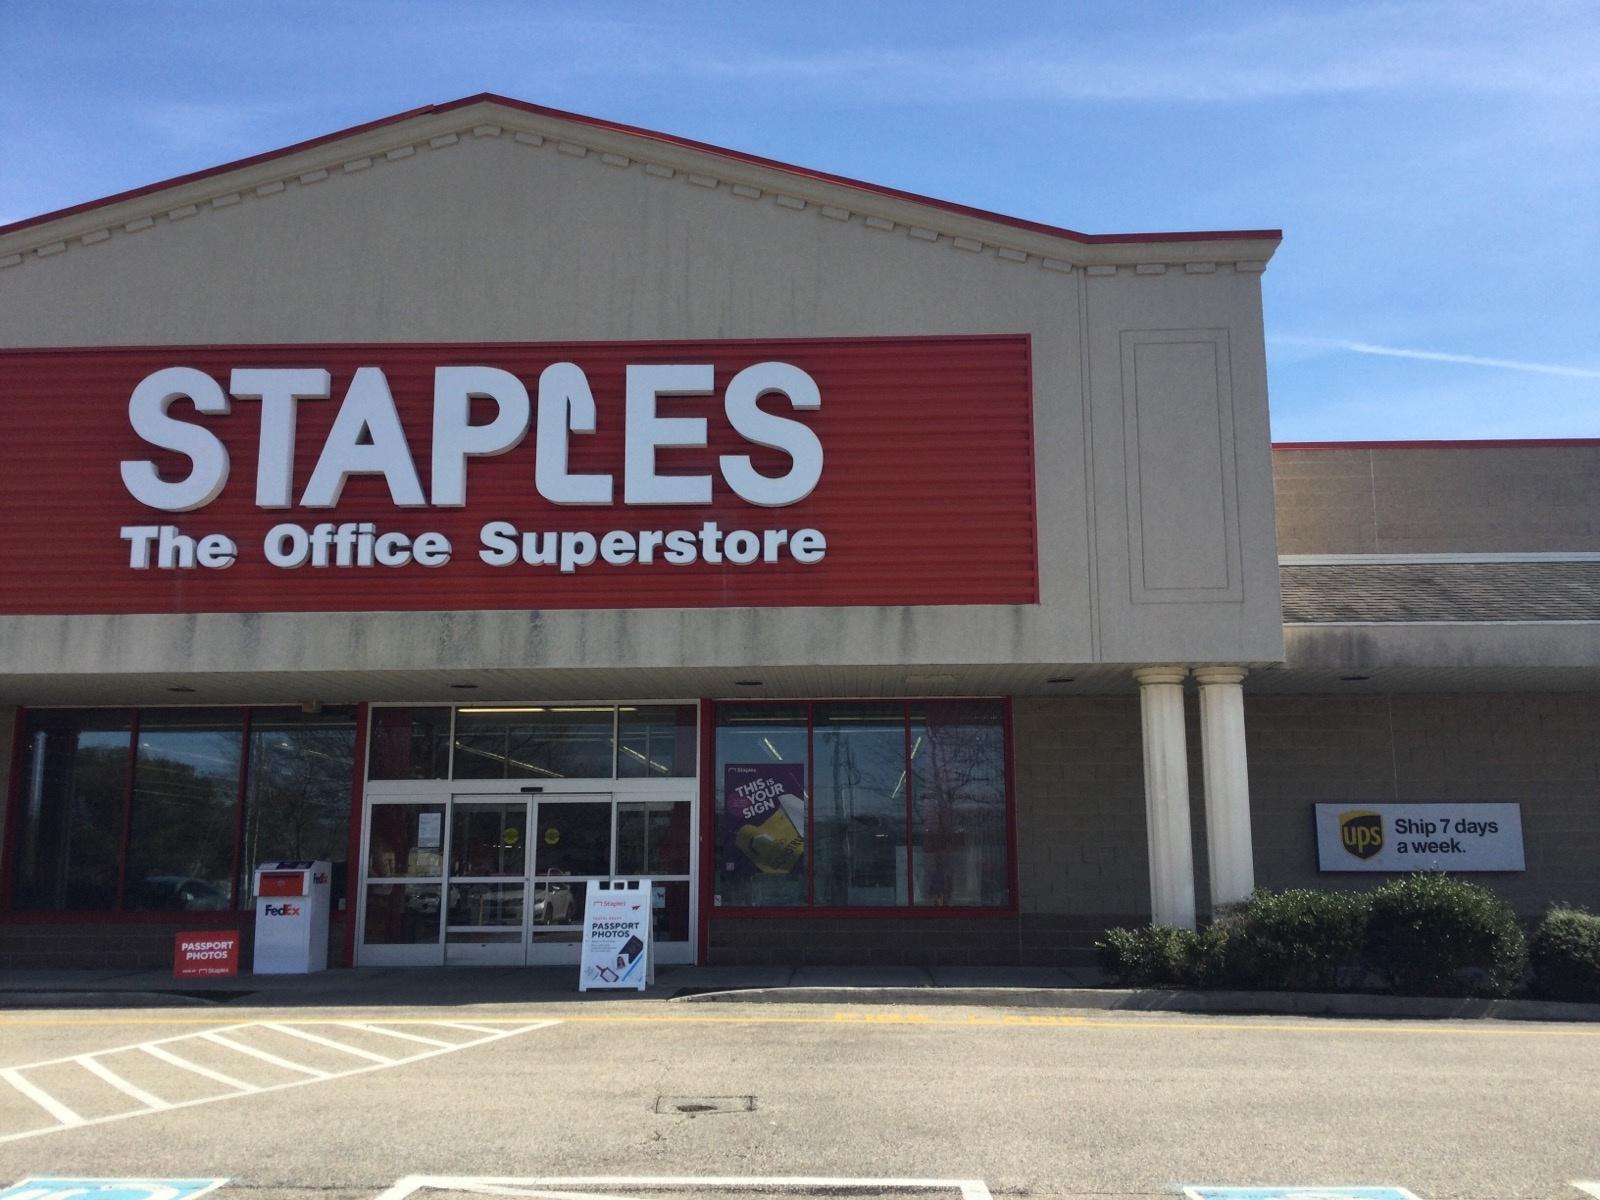 Staples, 1000 Boston Post Road, Old Saybrook, CT, Bus Lines - MapQuest